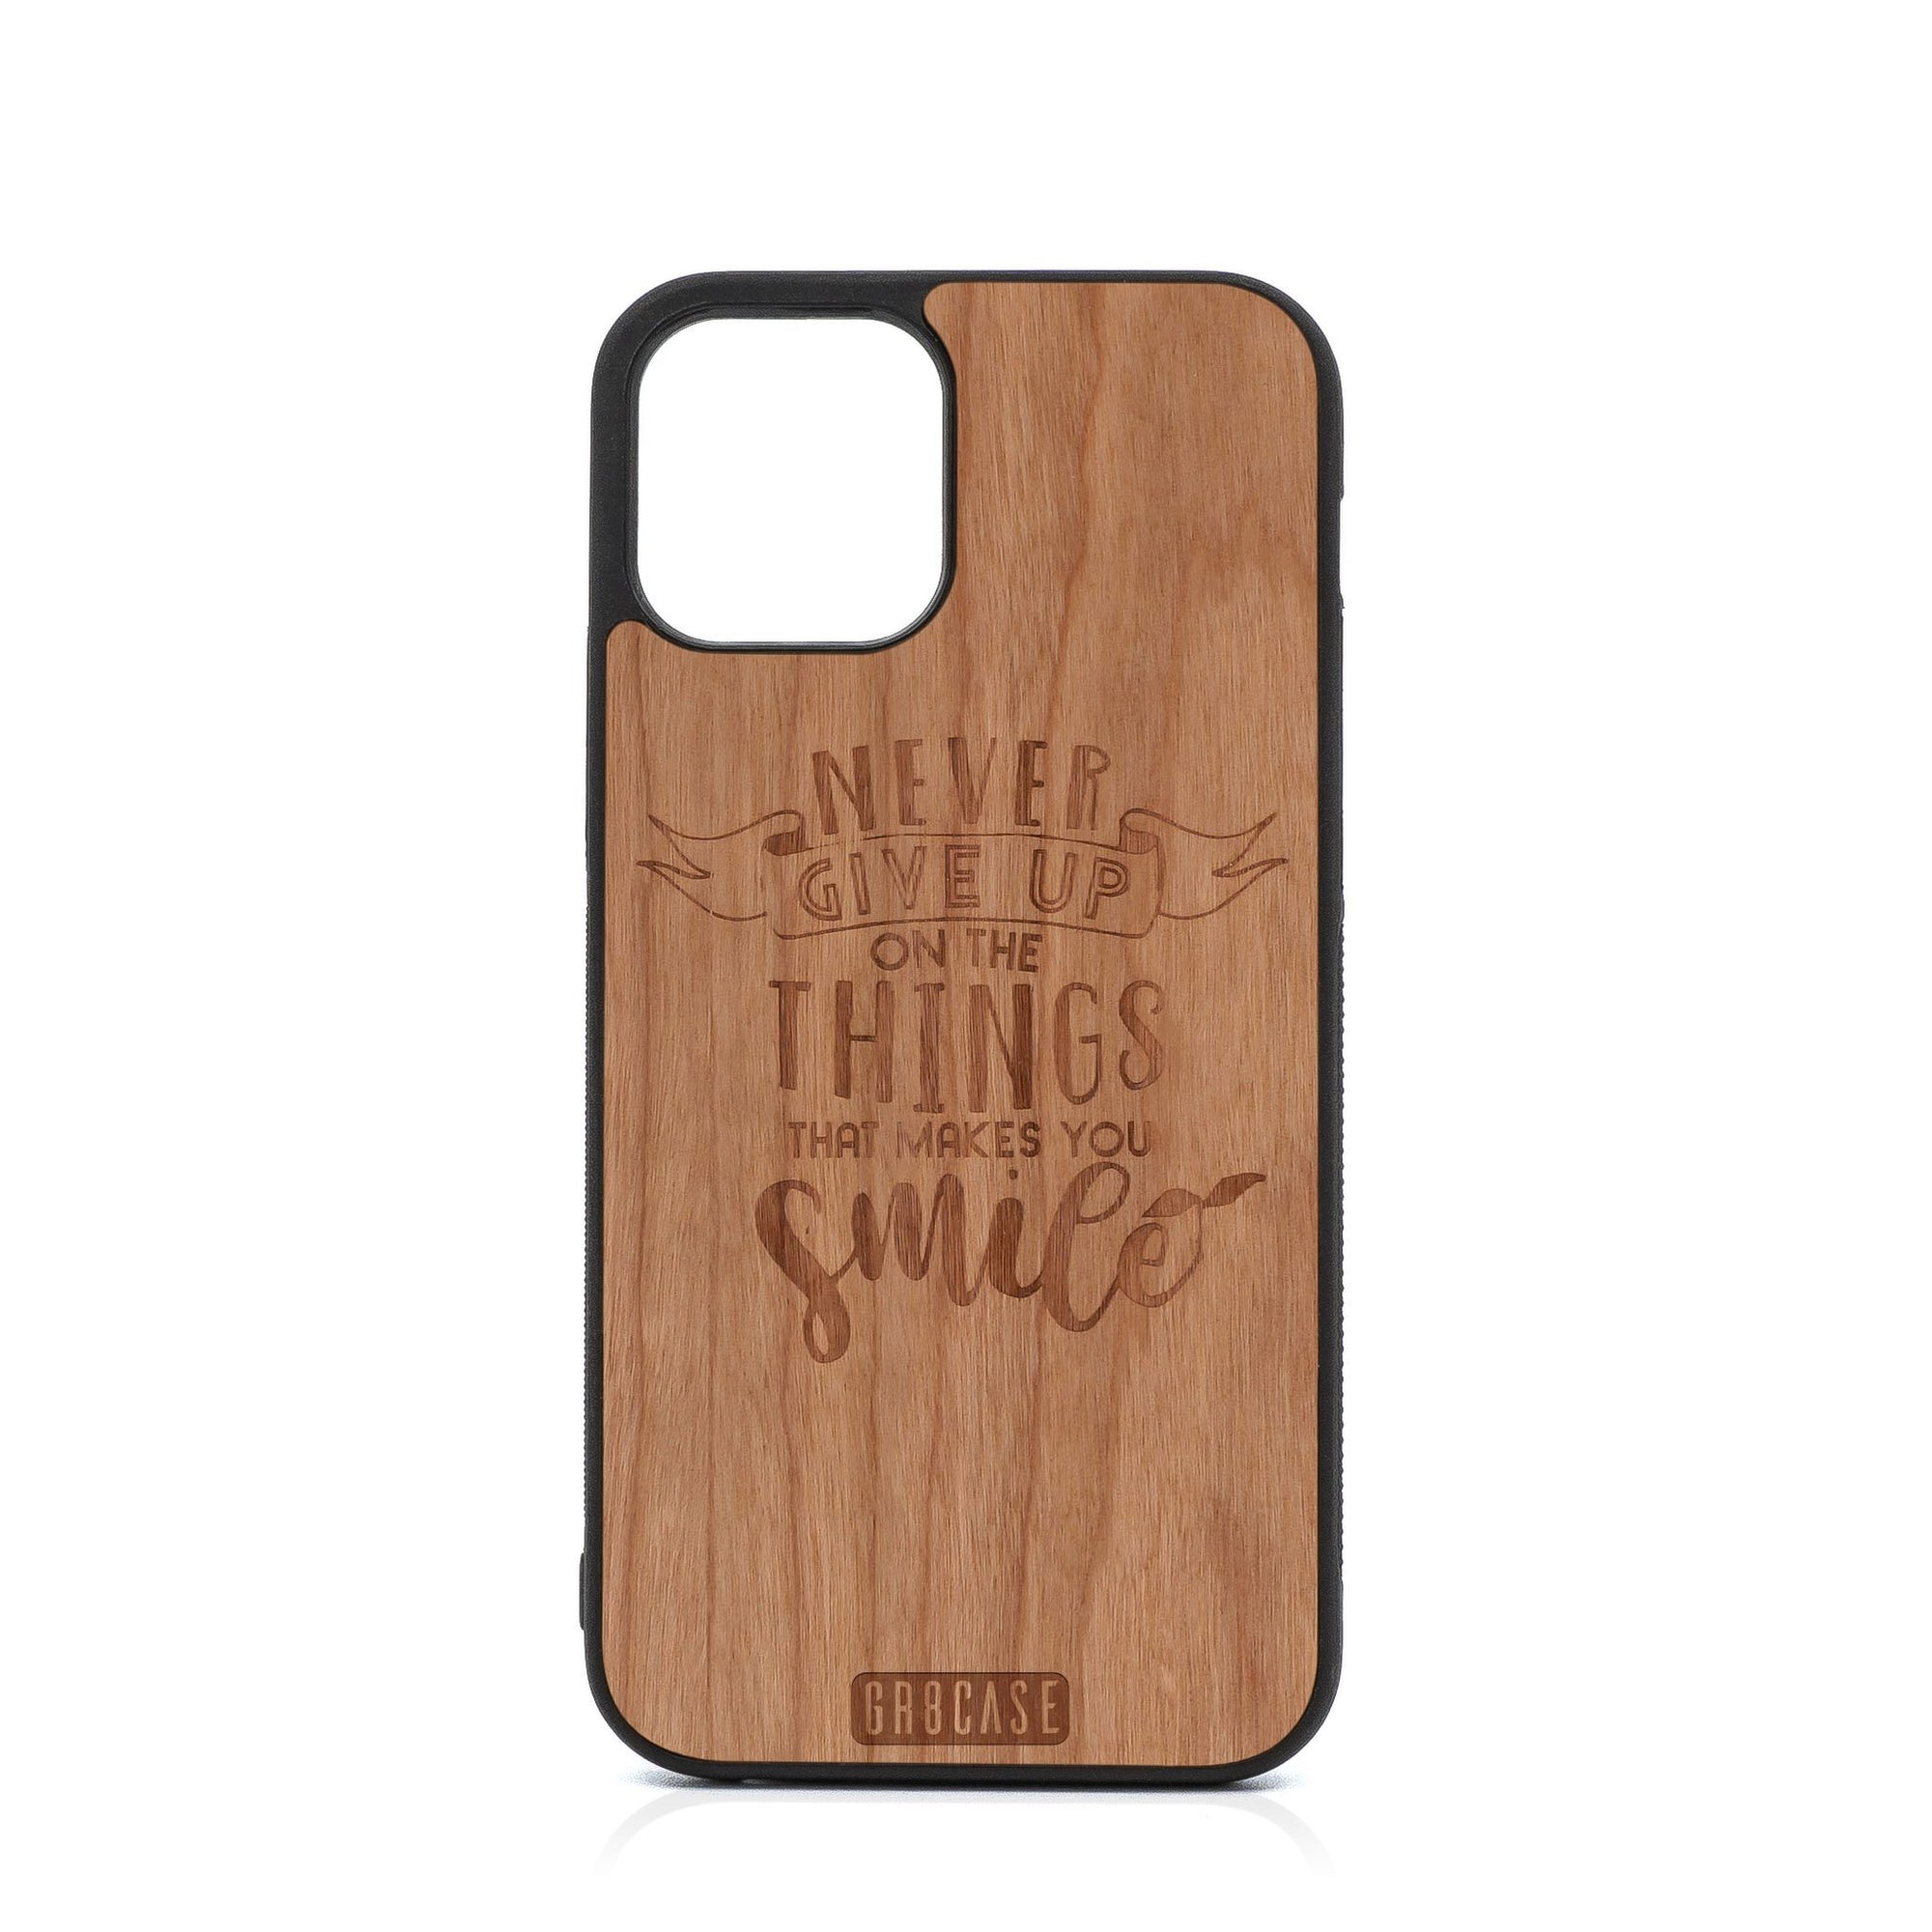 Never Give Up On The Things That Makes You Smile Design Wood Case For iPhone 12